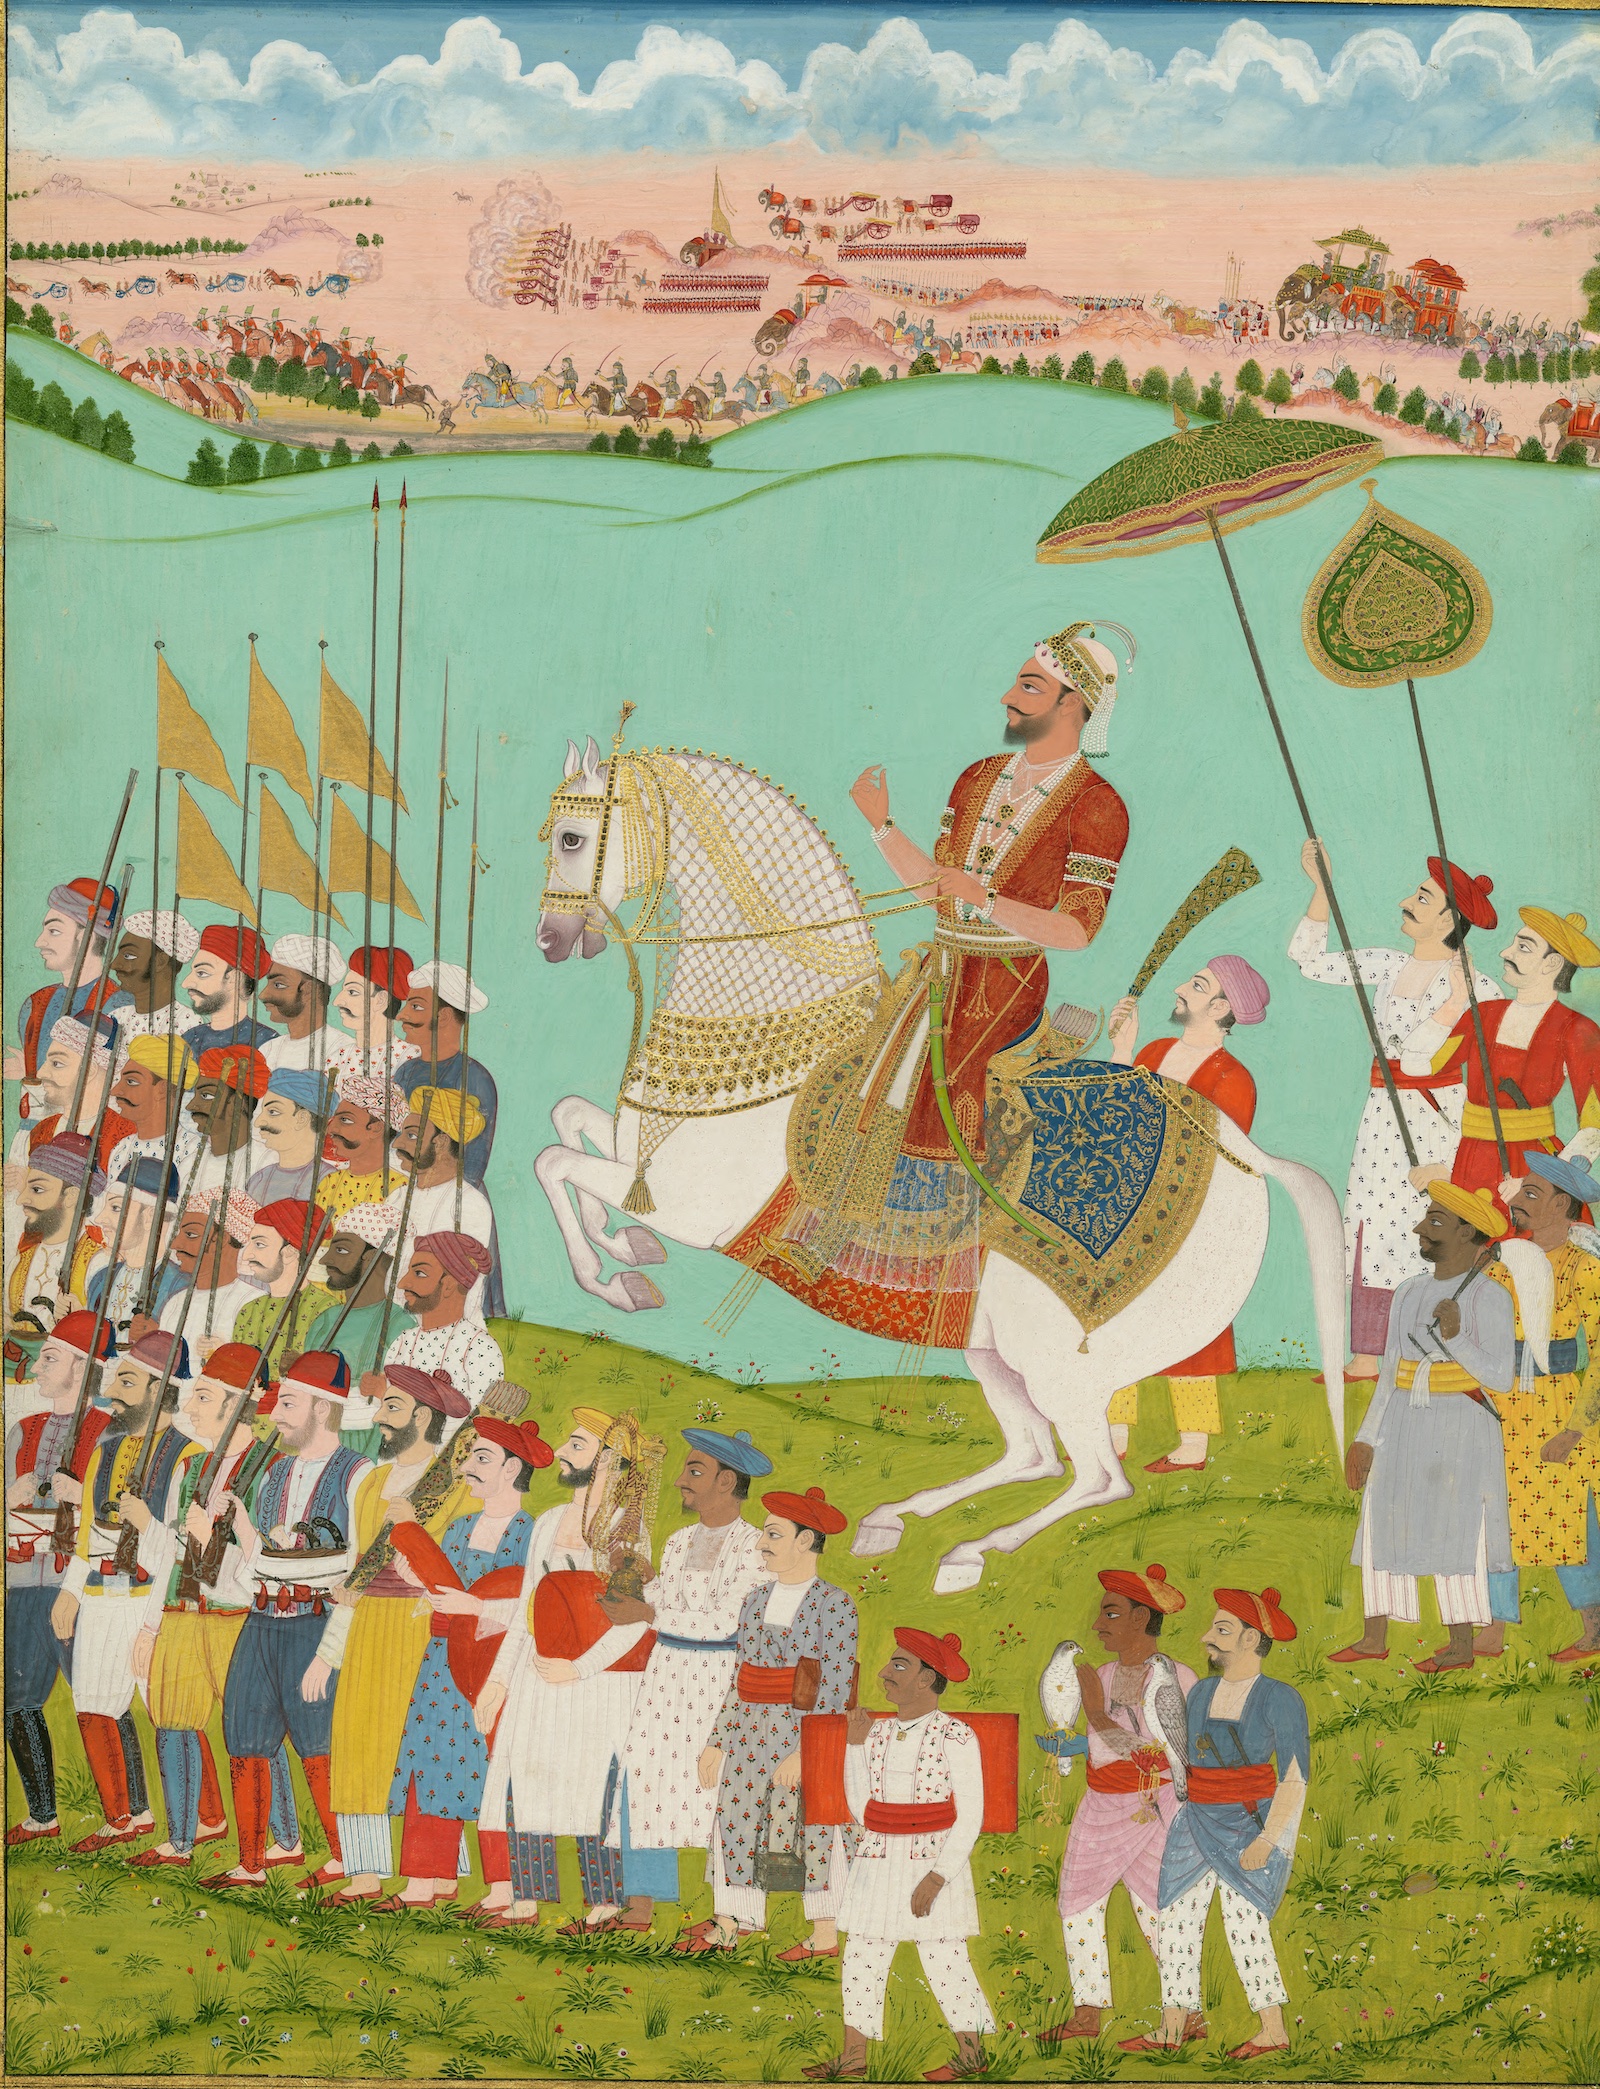 A maharajah in state procession in Hyderabad, c. 1800, during the reign of the Talpur dynasty. 